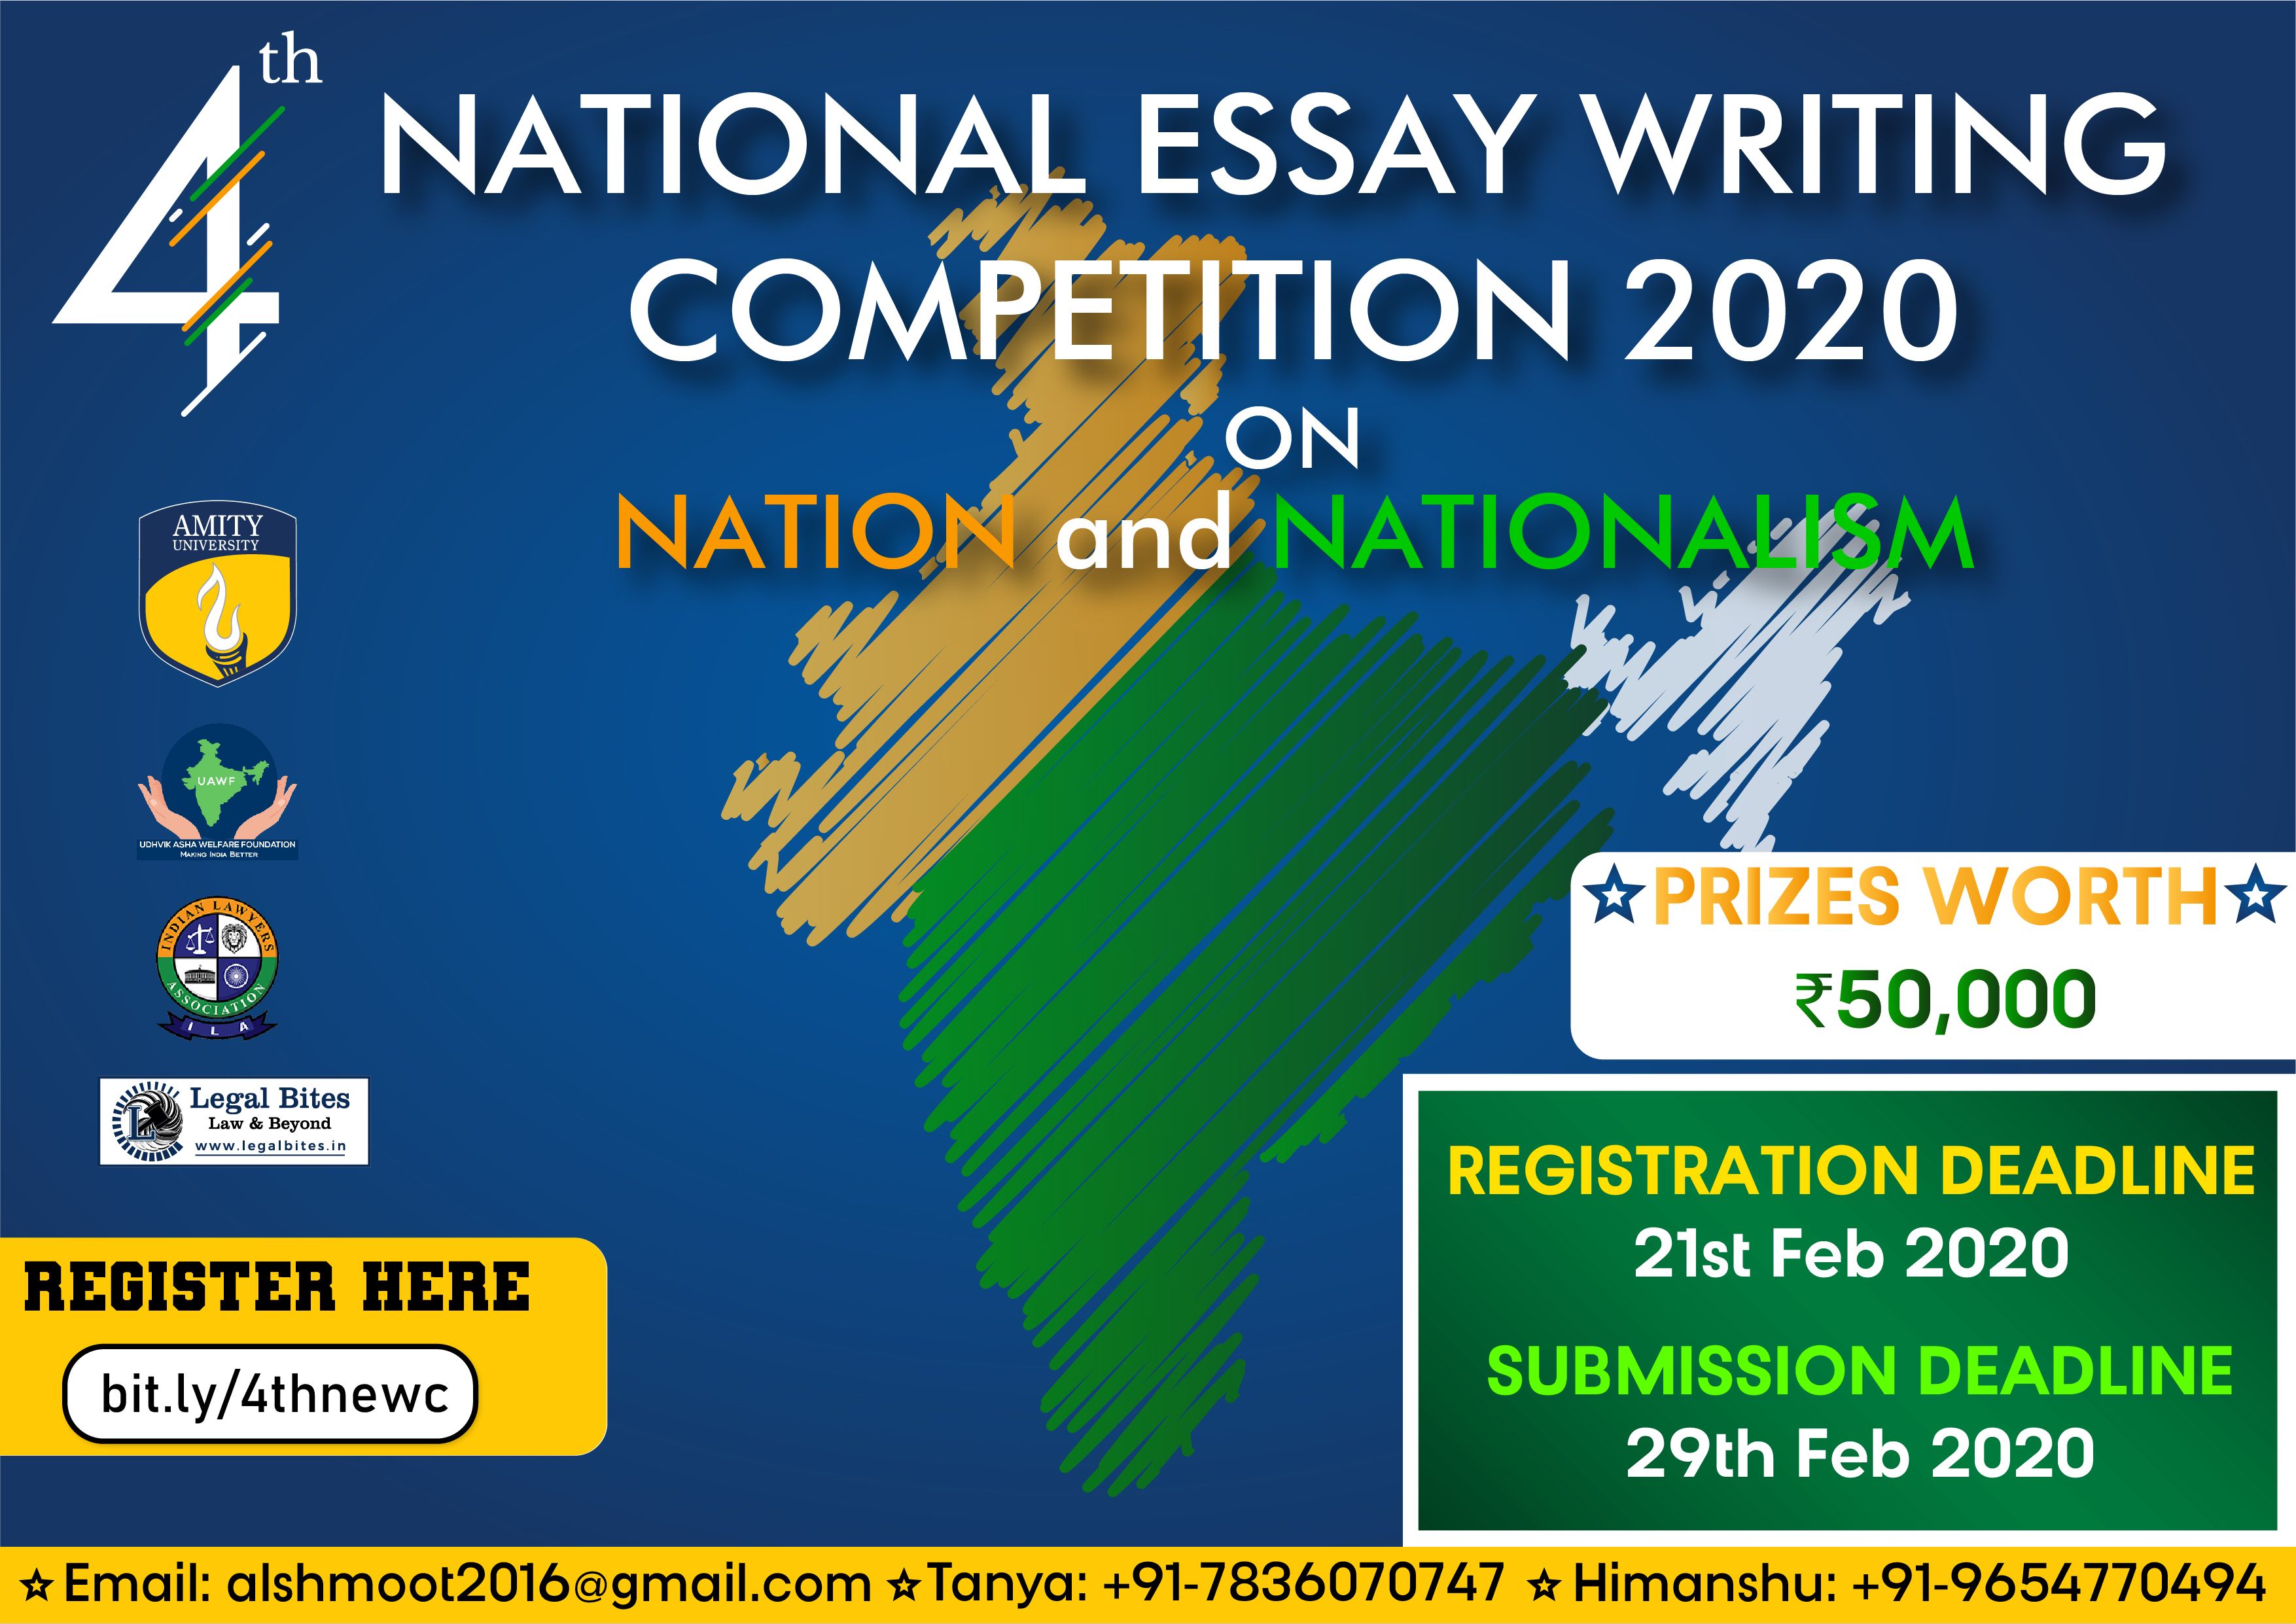 4th National Essay Writing Competition on Nation and Nationalism 2020